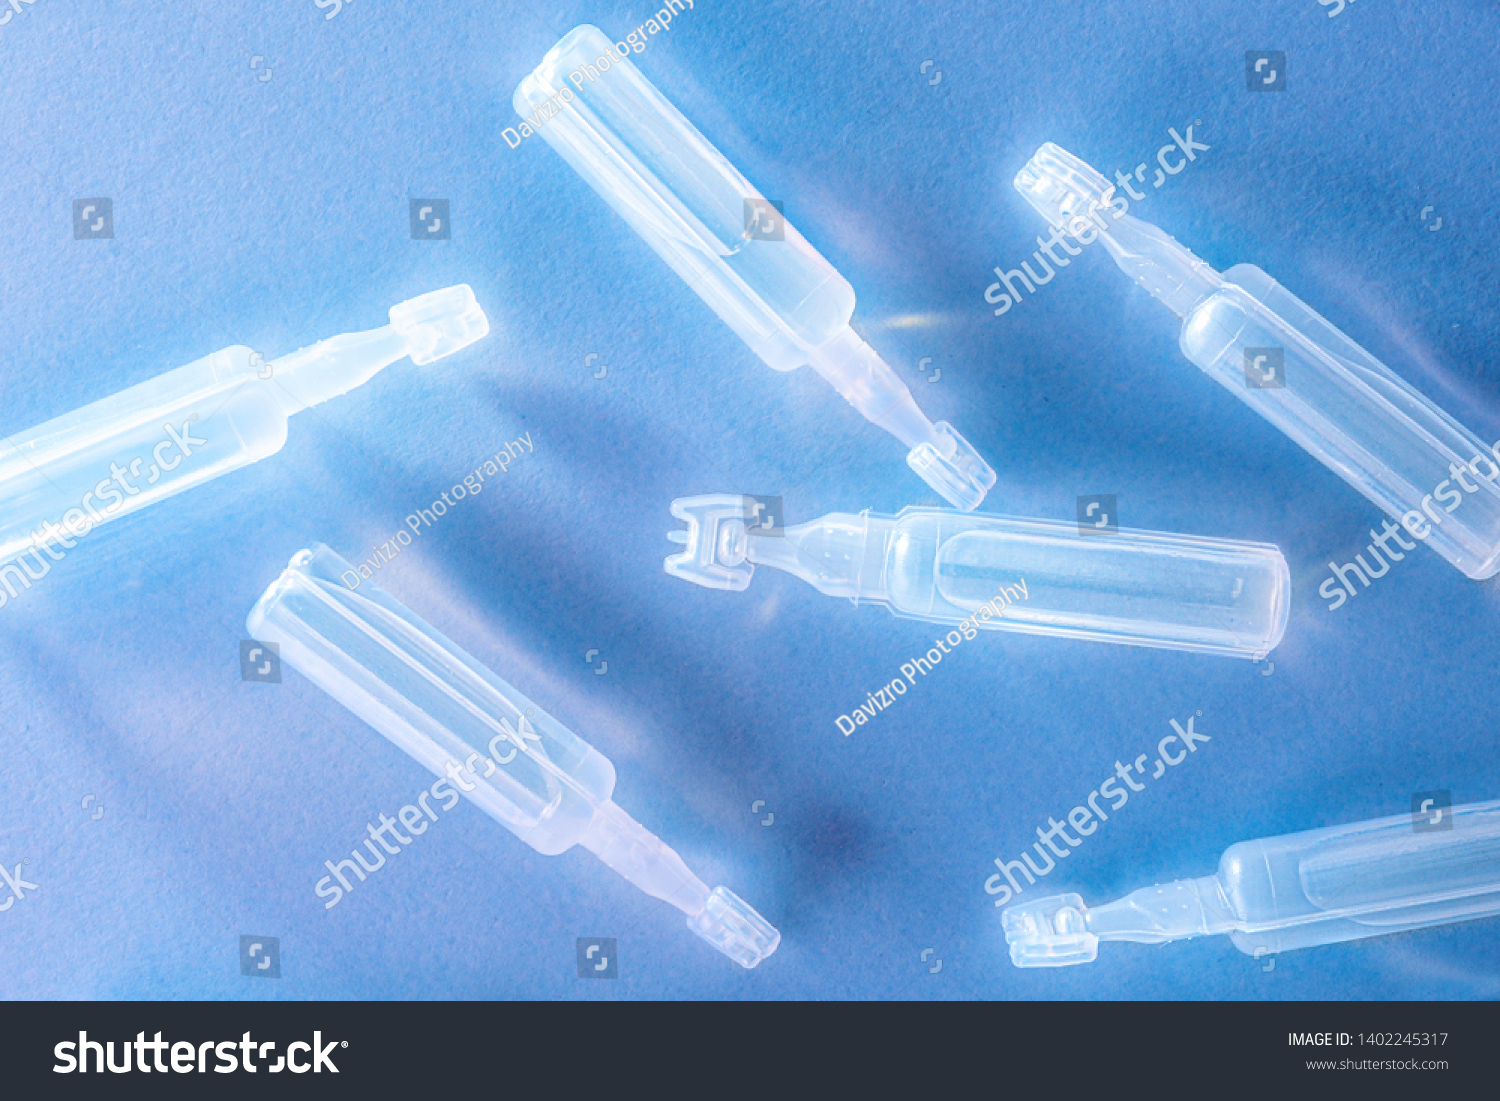 Artificial tears eye drops encapsulated in plastic pipettes and reflected on glass table with blue background. Horizontal composition. Top view. #1402245317